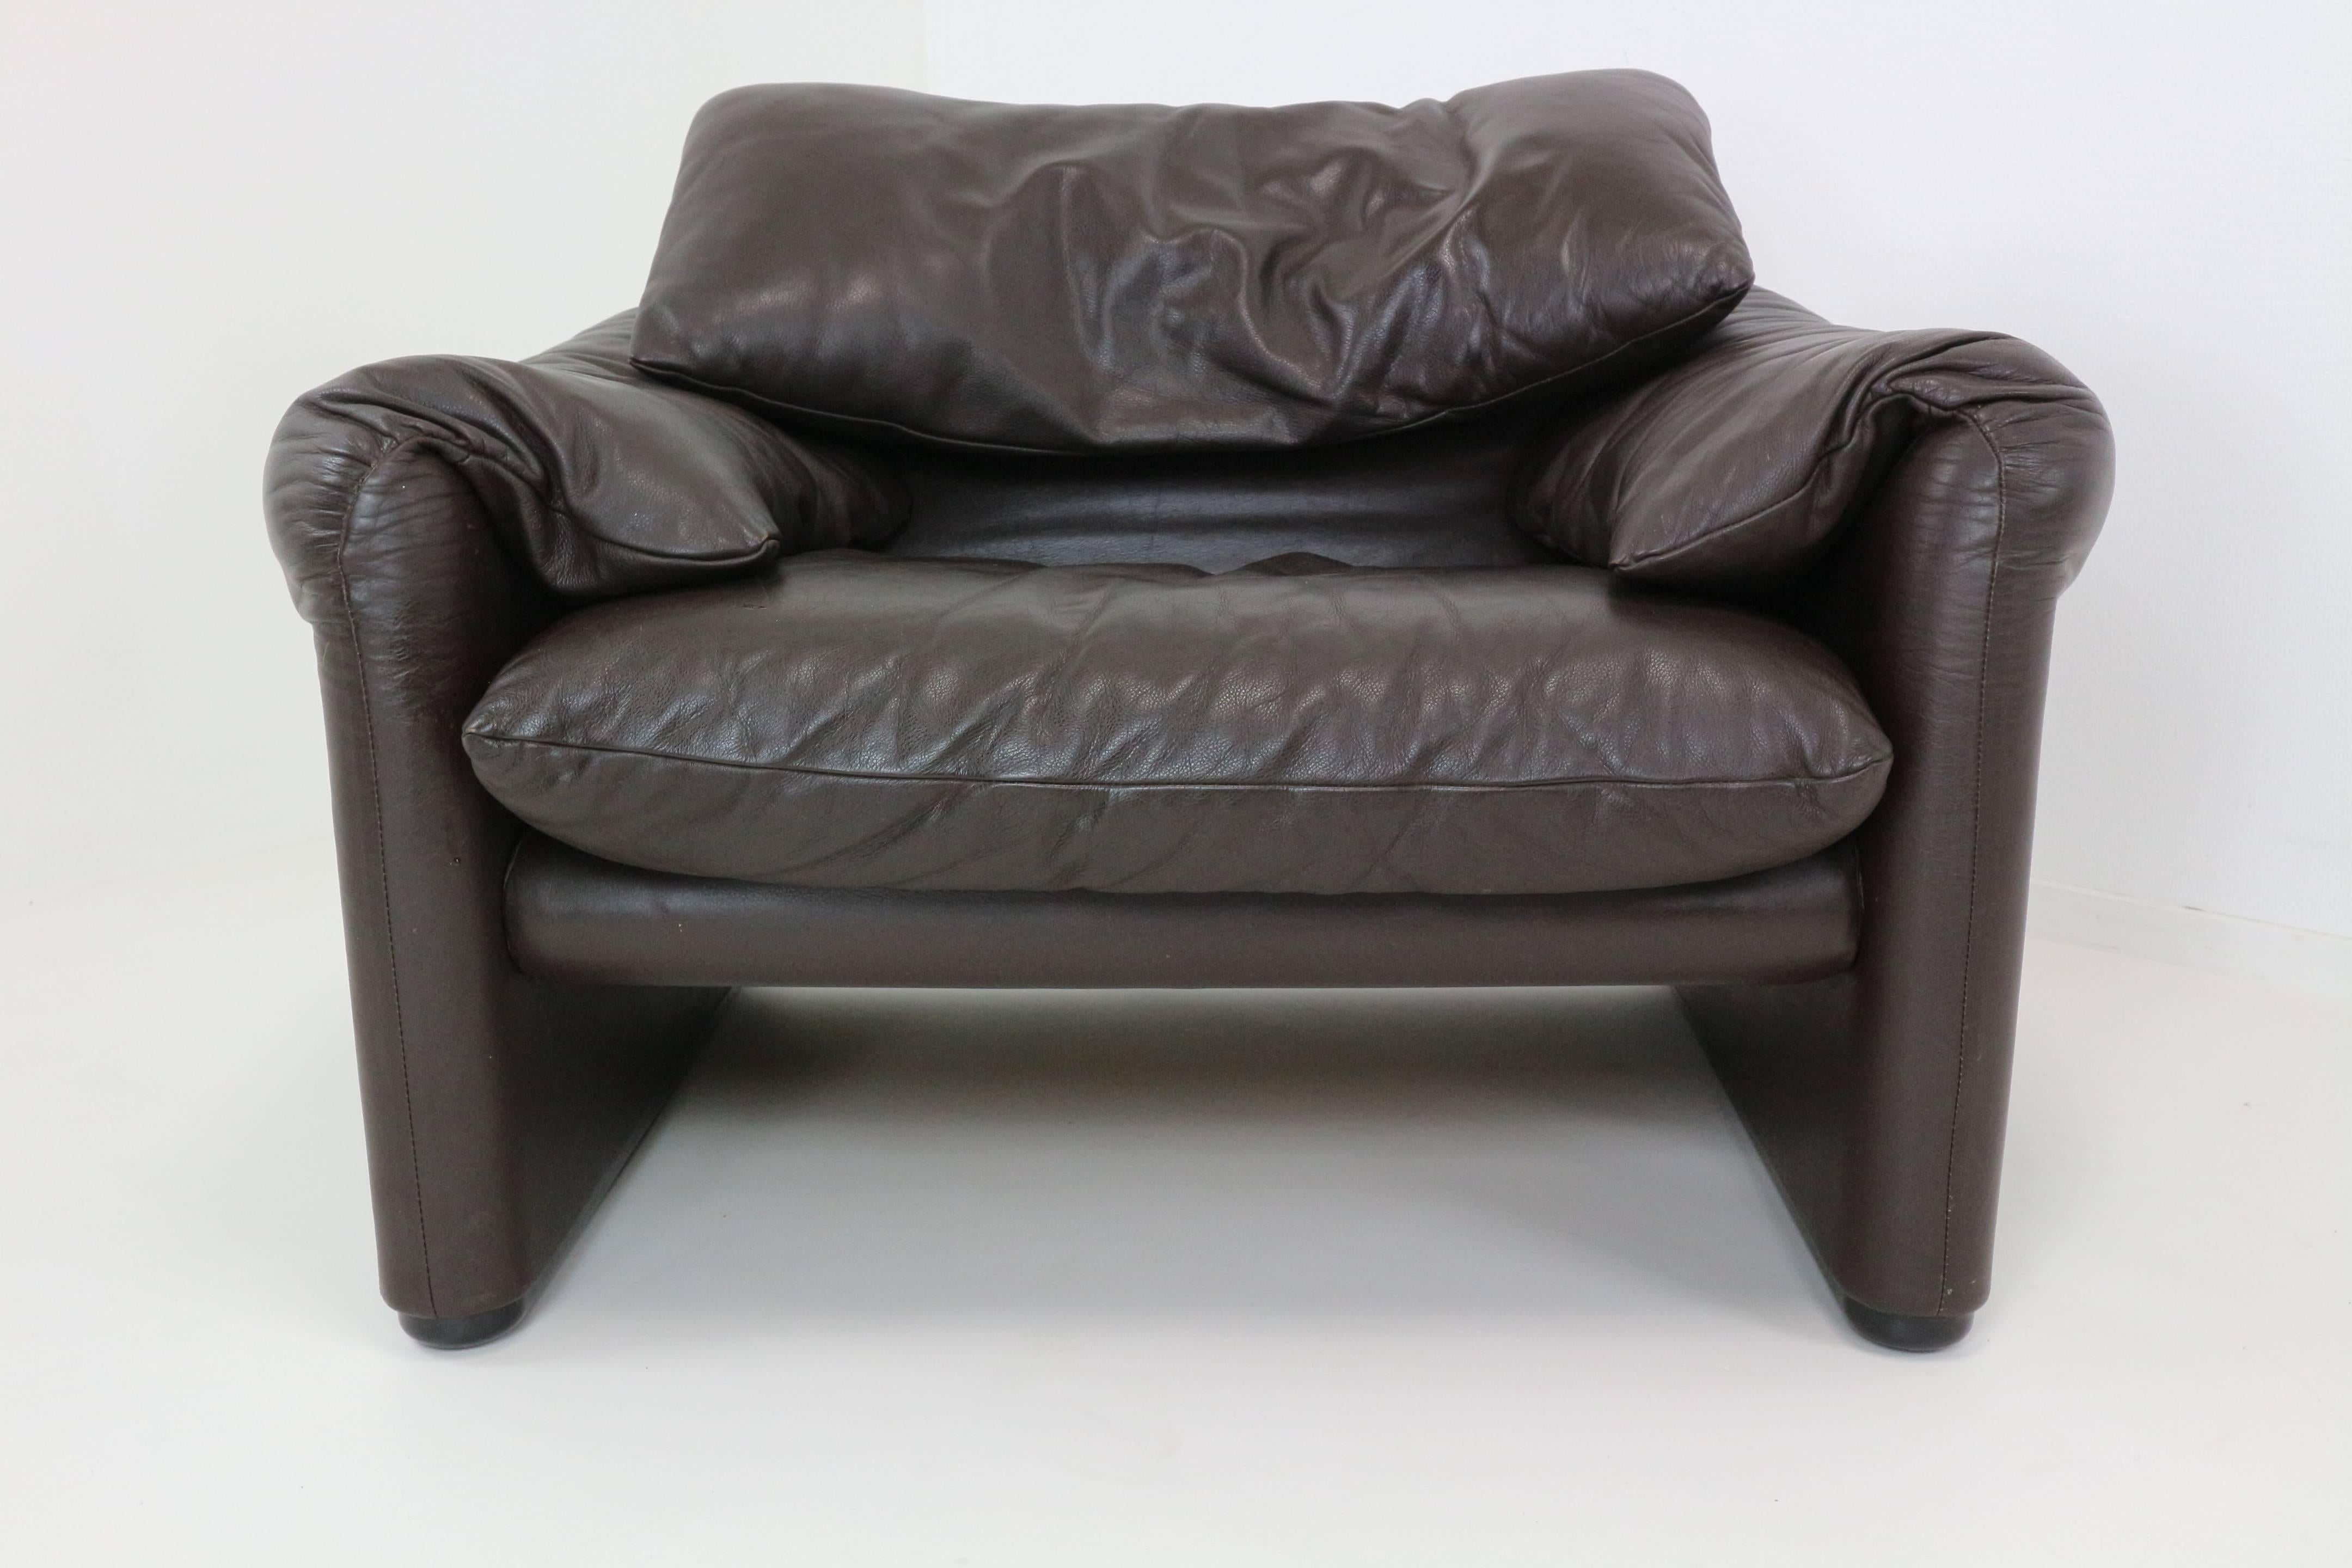 Leather Lounge Chair Maralunga Design by Casina 2